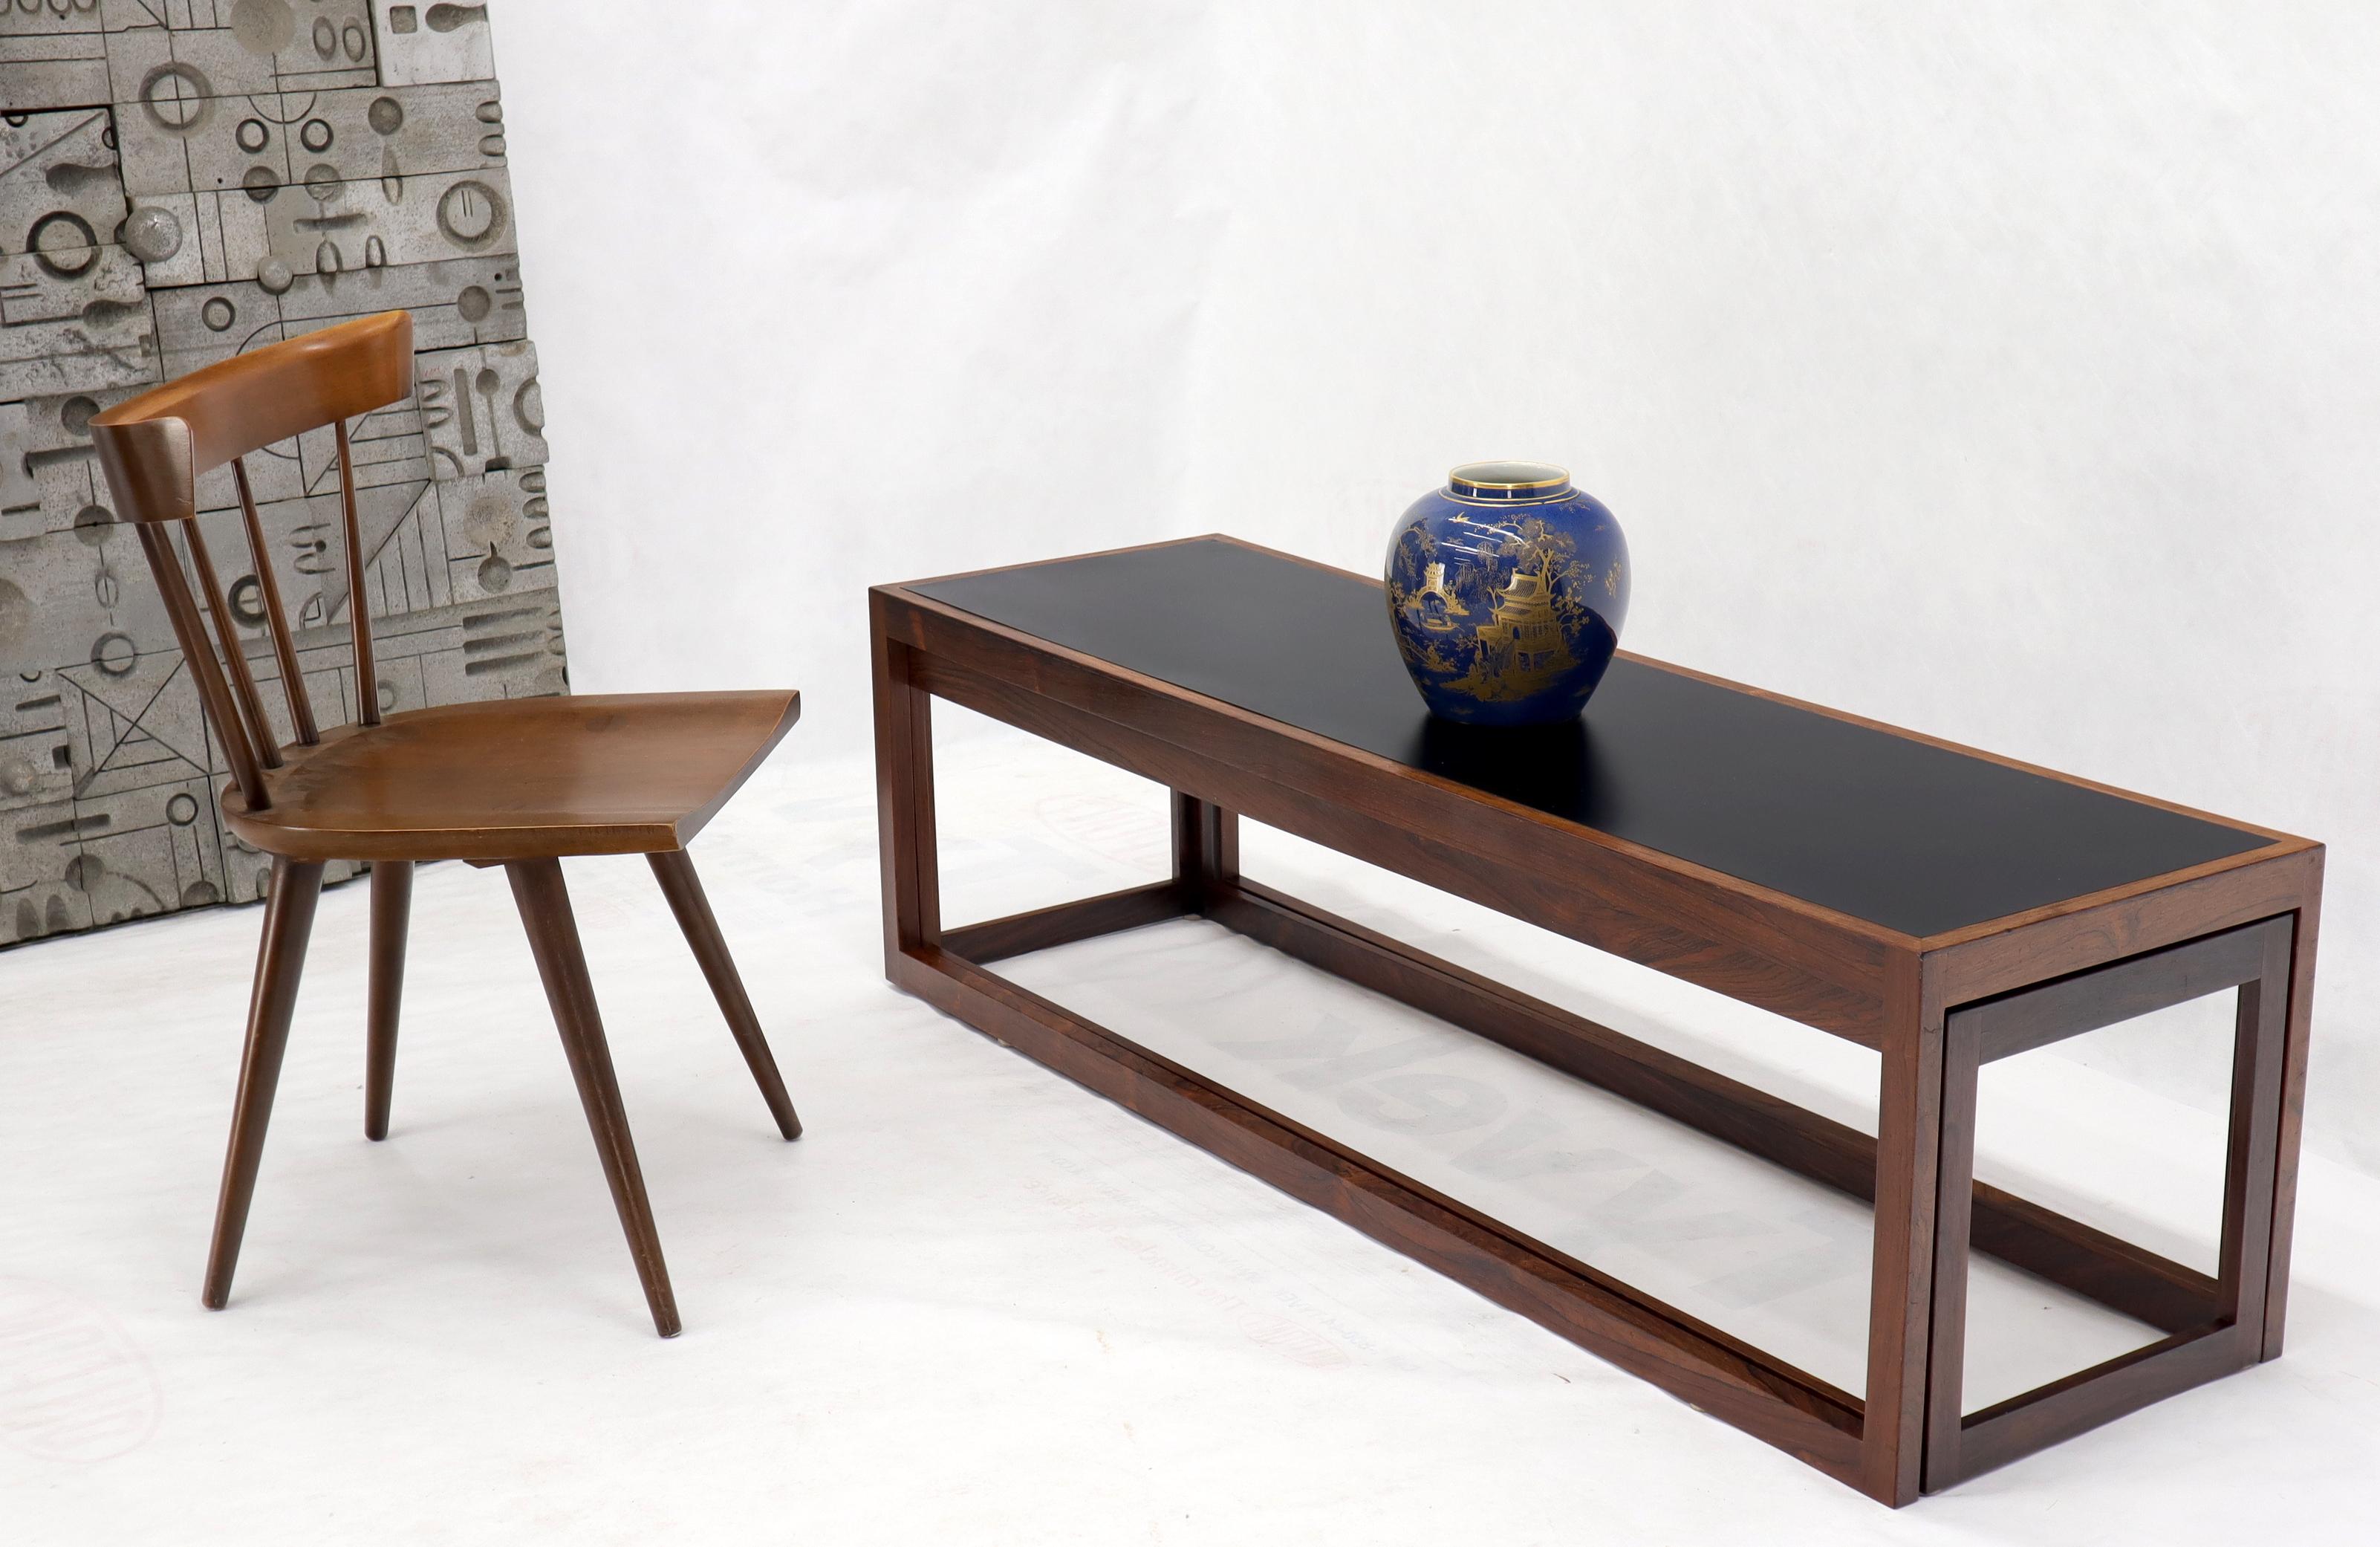 Danish Mid-Century Modern solid rosewood frames black laminated top nesting coffee tables.